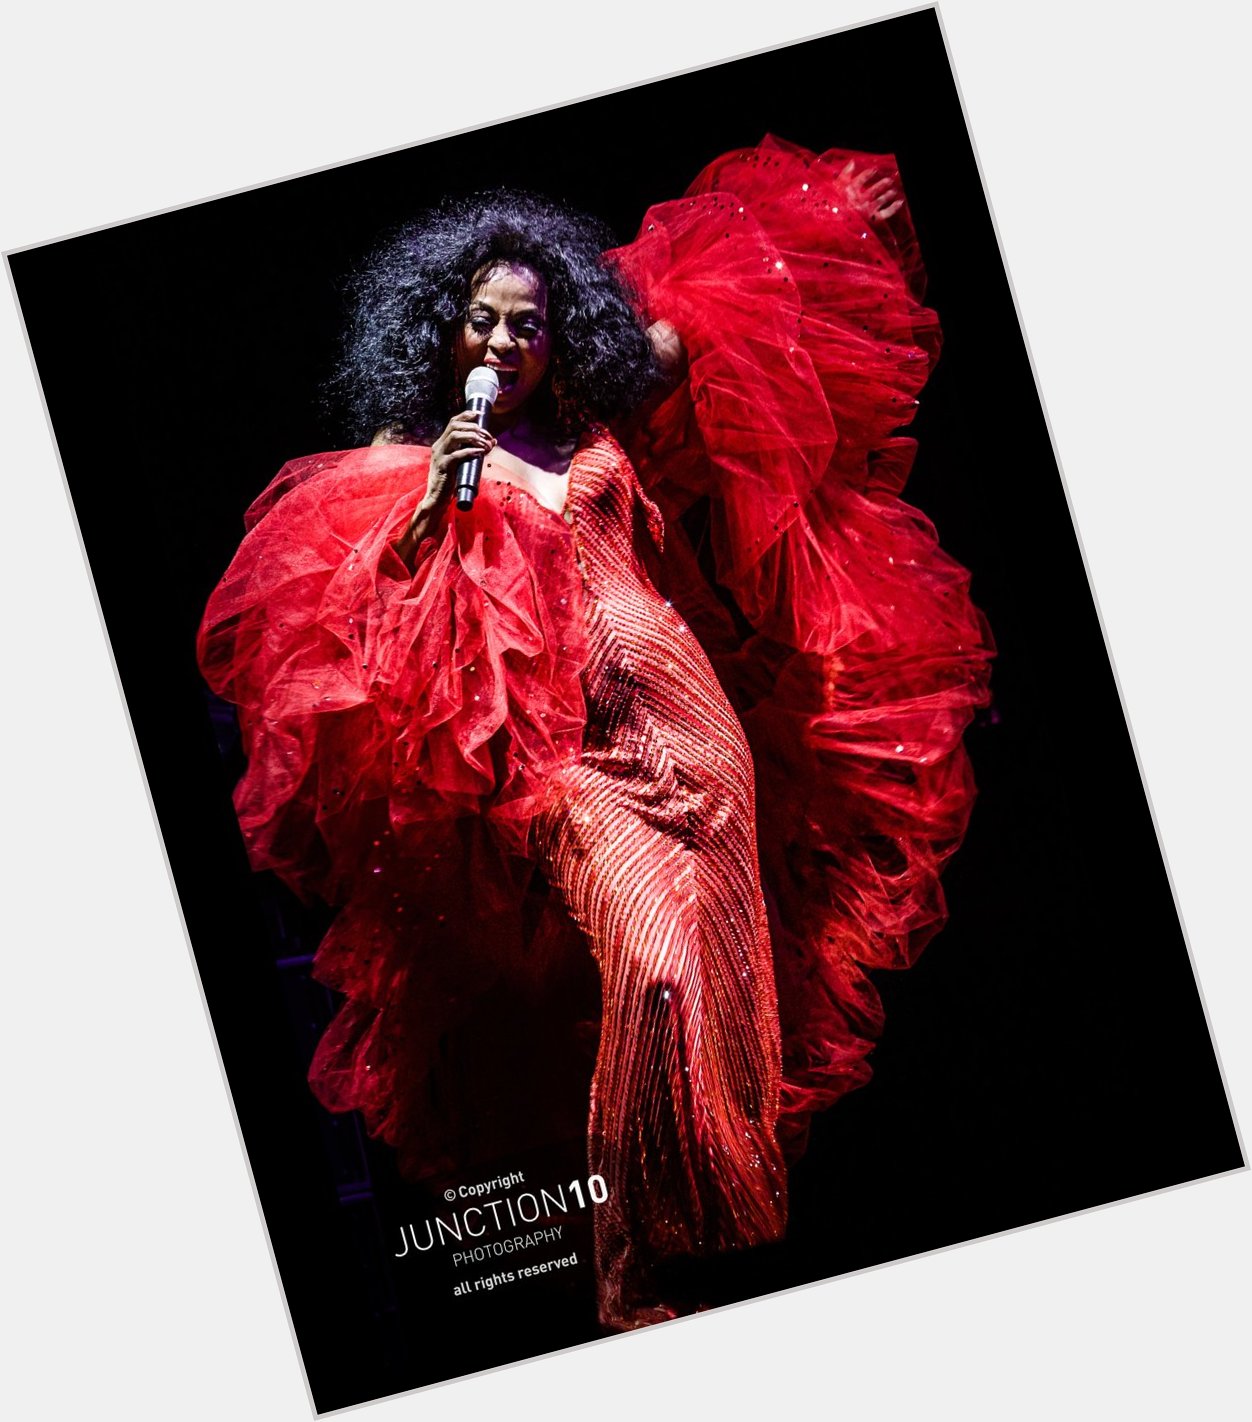 Happy birthday to the \Supreme\ Diana Ross! 